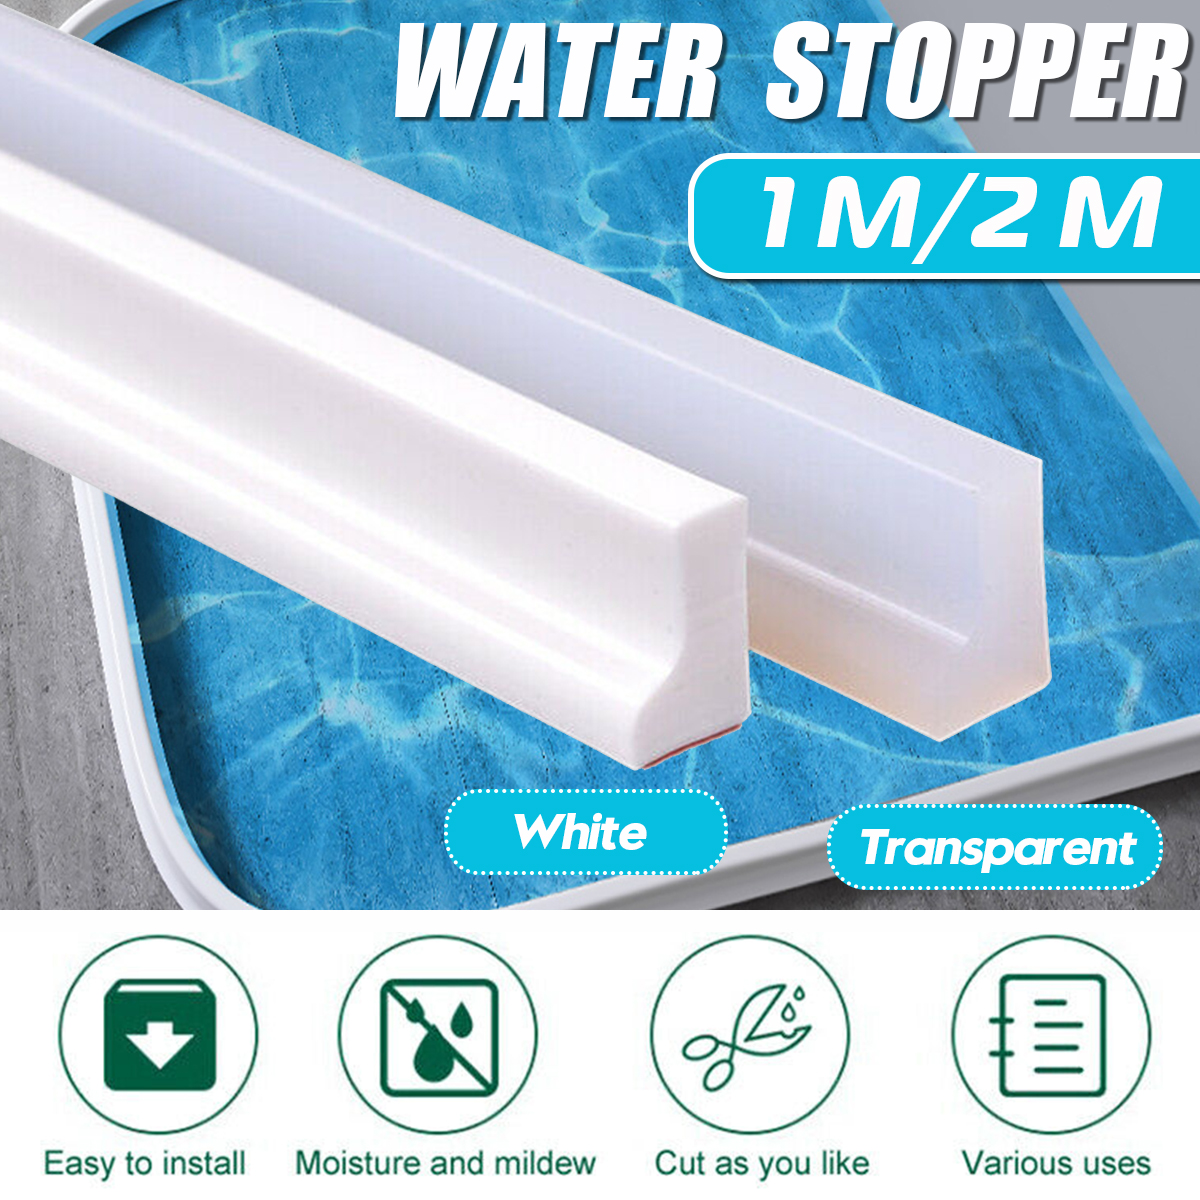 Bathroom-Kitchen-Foldable-Water-Stopper-Self-adhesive-Rubber-Dam-Shower-Barrier-WhiteTransparent-1759927-1